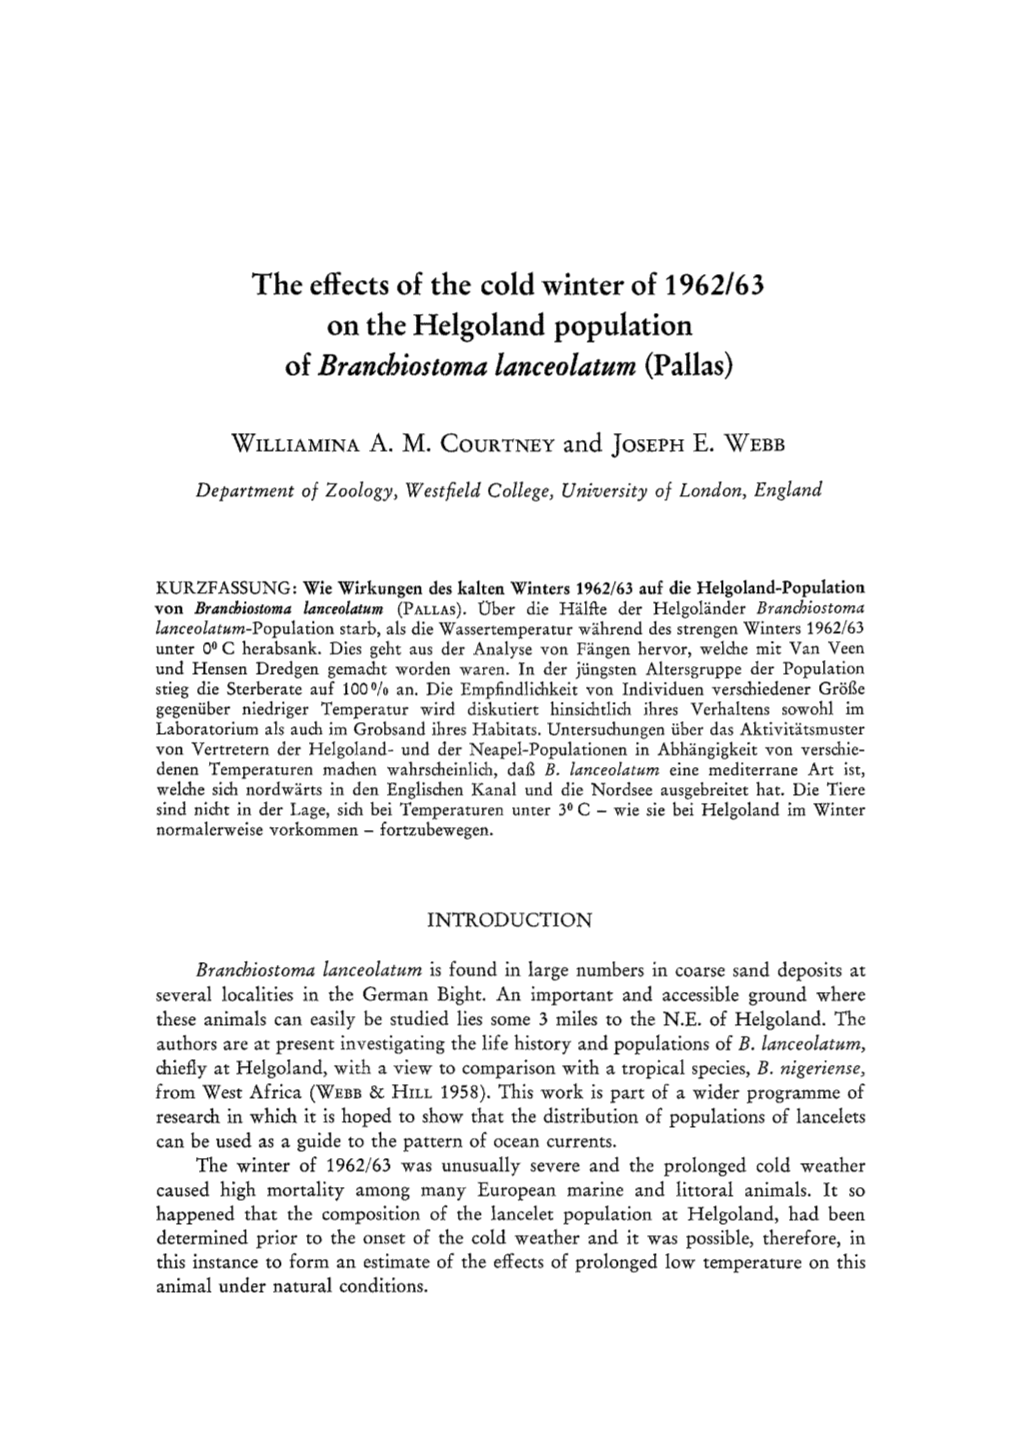 The Effects of the Cold Winter of 1962/63 on the Helgoland Population of Branchiostoraa Ianceolatum (Pallas)